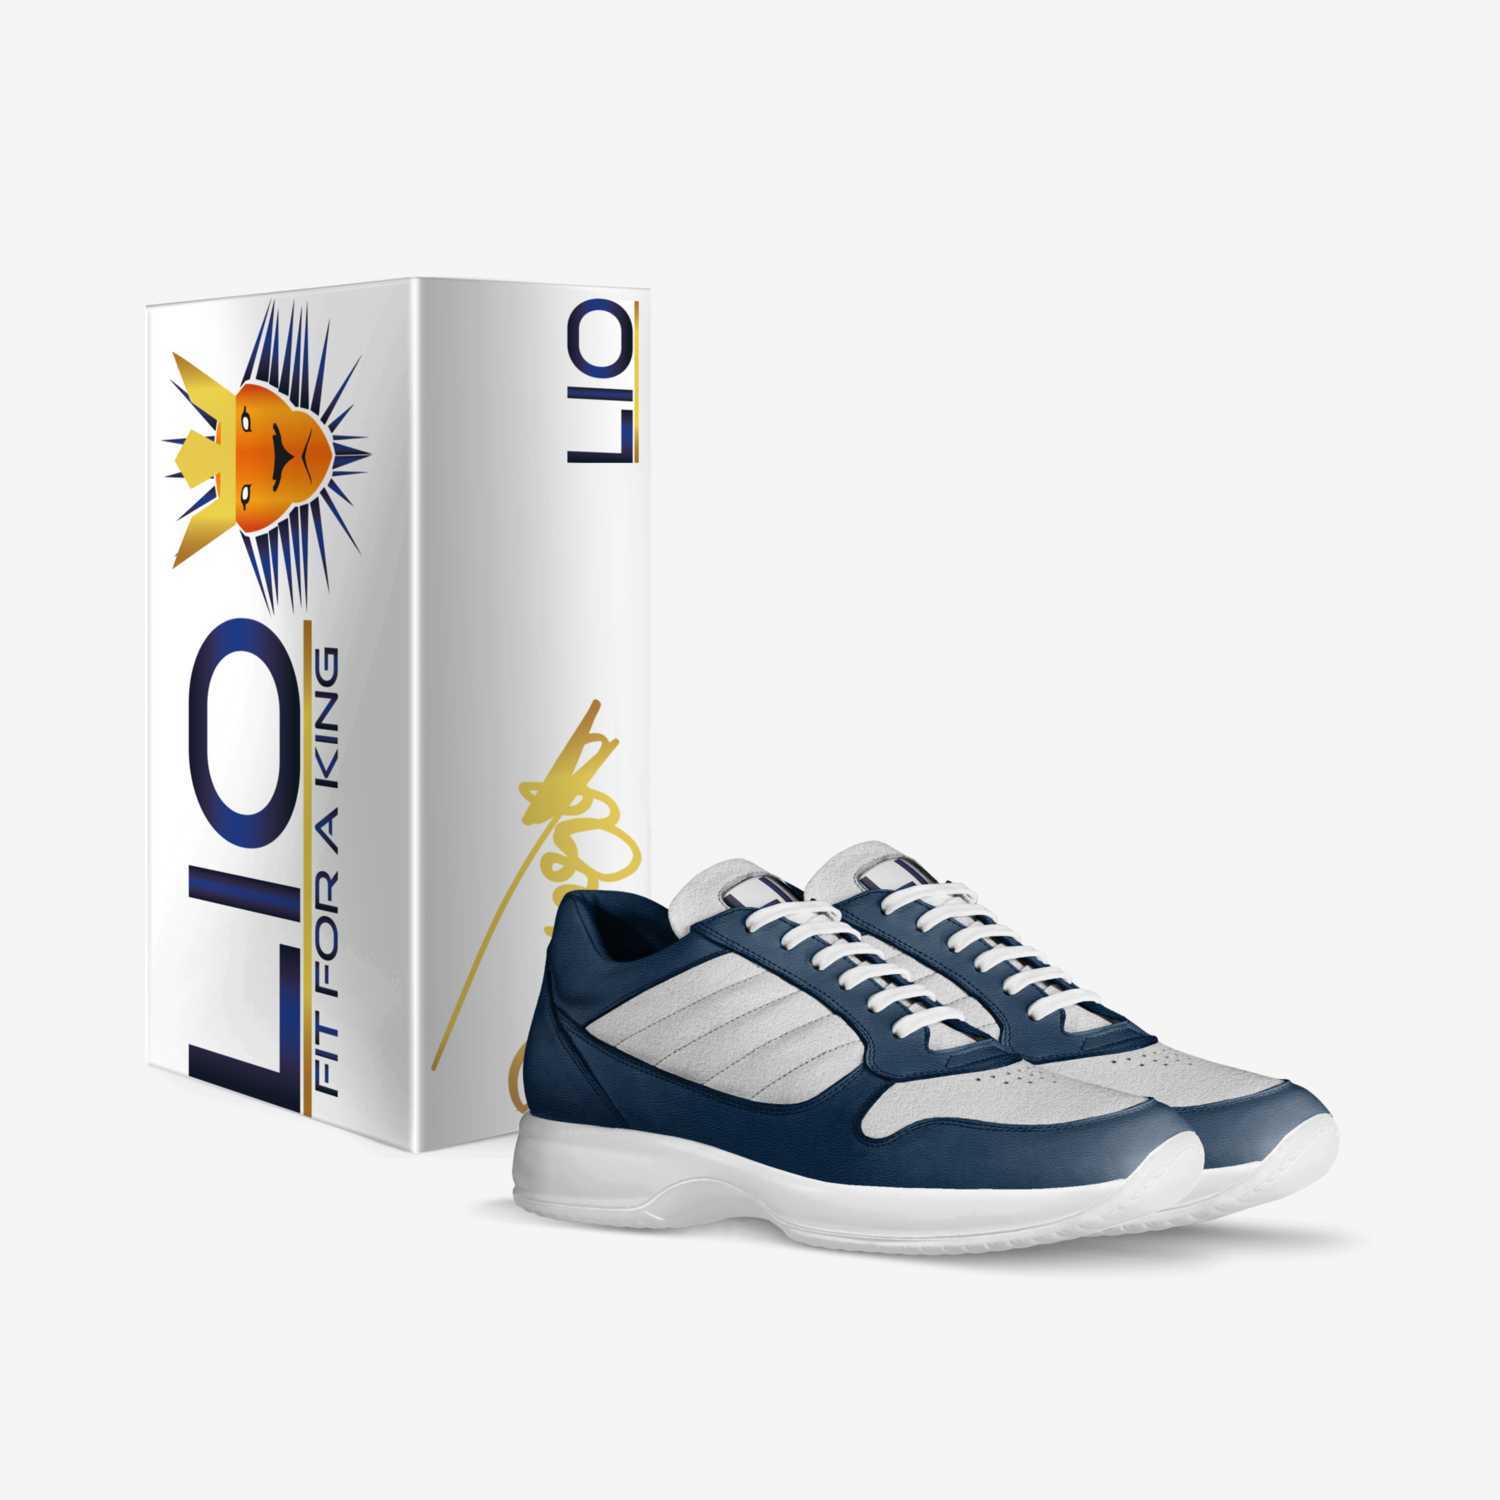 Lio custom made in Italy shoes by Douglas Fernandez | Box view